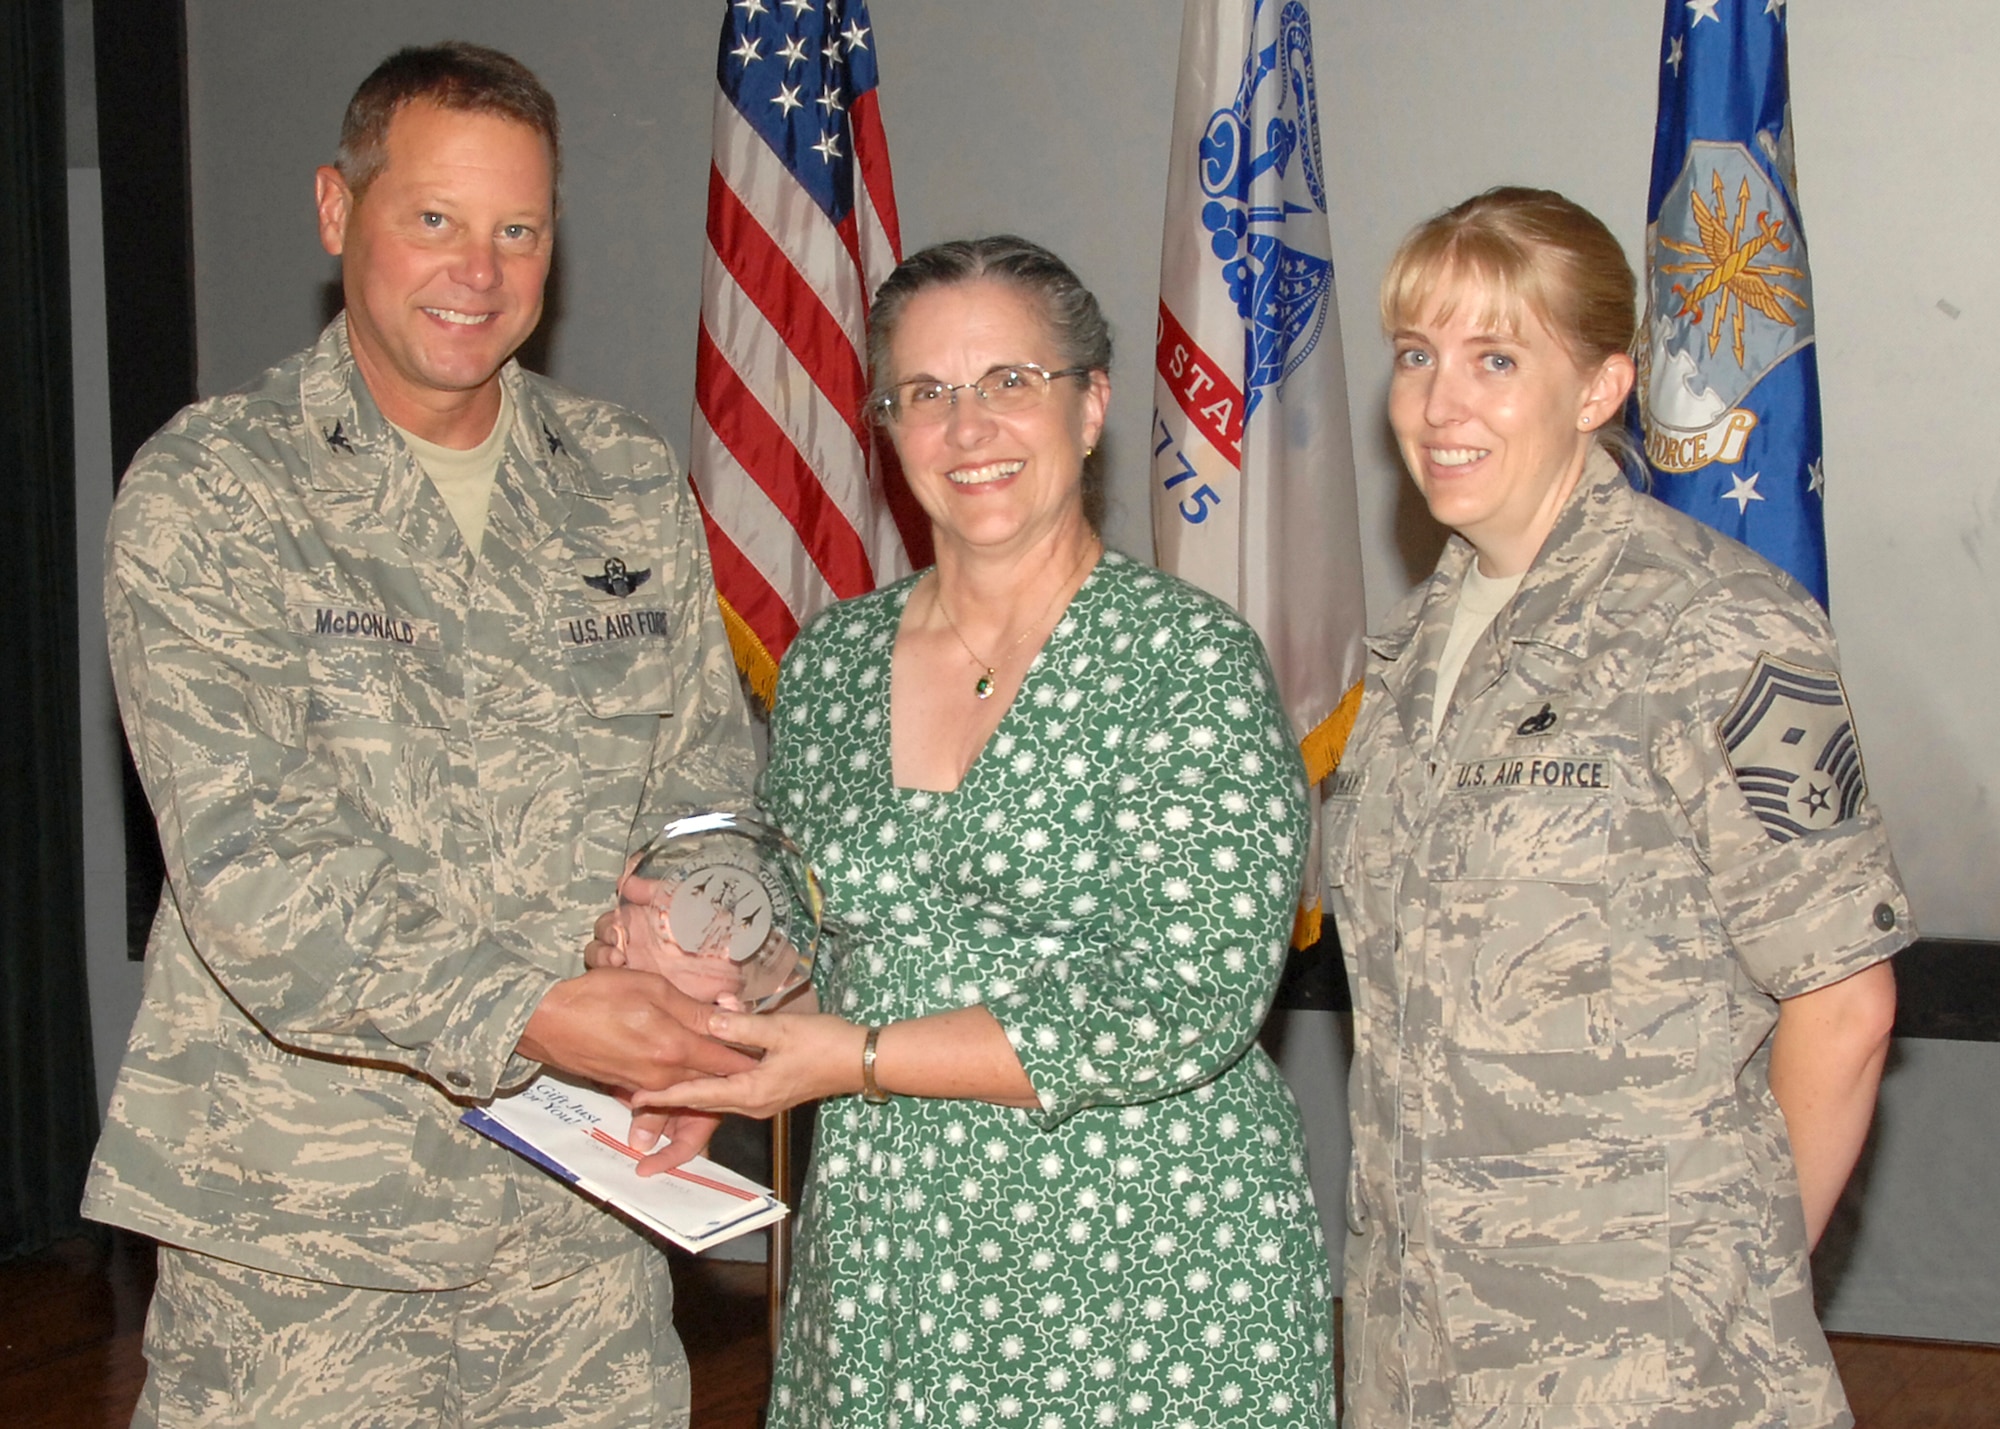 ANDREWS AIR FORCE BASE, Md. - Col. Michael J. McDonald, the commander of the Air National Guard Readiness Center, presents the Civilian of the Quarter, Category 1 award to Edna C. Davis, a secretary at The I.G. Brown Air National Guard Training and Education Center, McGhee Tyson Air National Guard Base, Tenn., on Aug. 21. (U.S. Air Force photo by Master Sgt. Jerry R. Bynum)(Released)